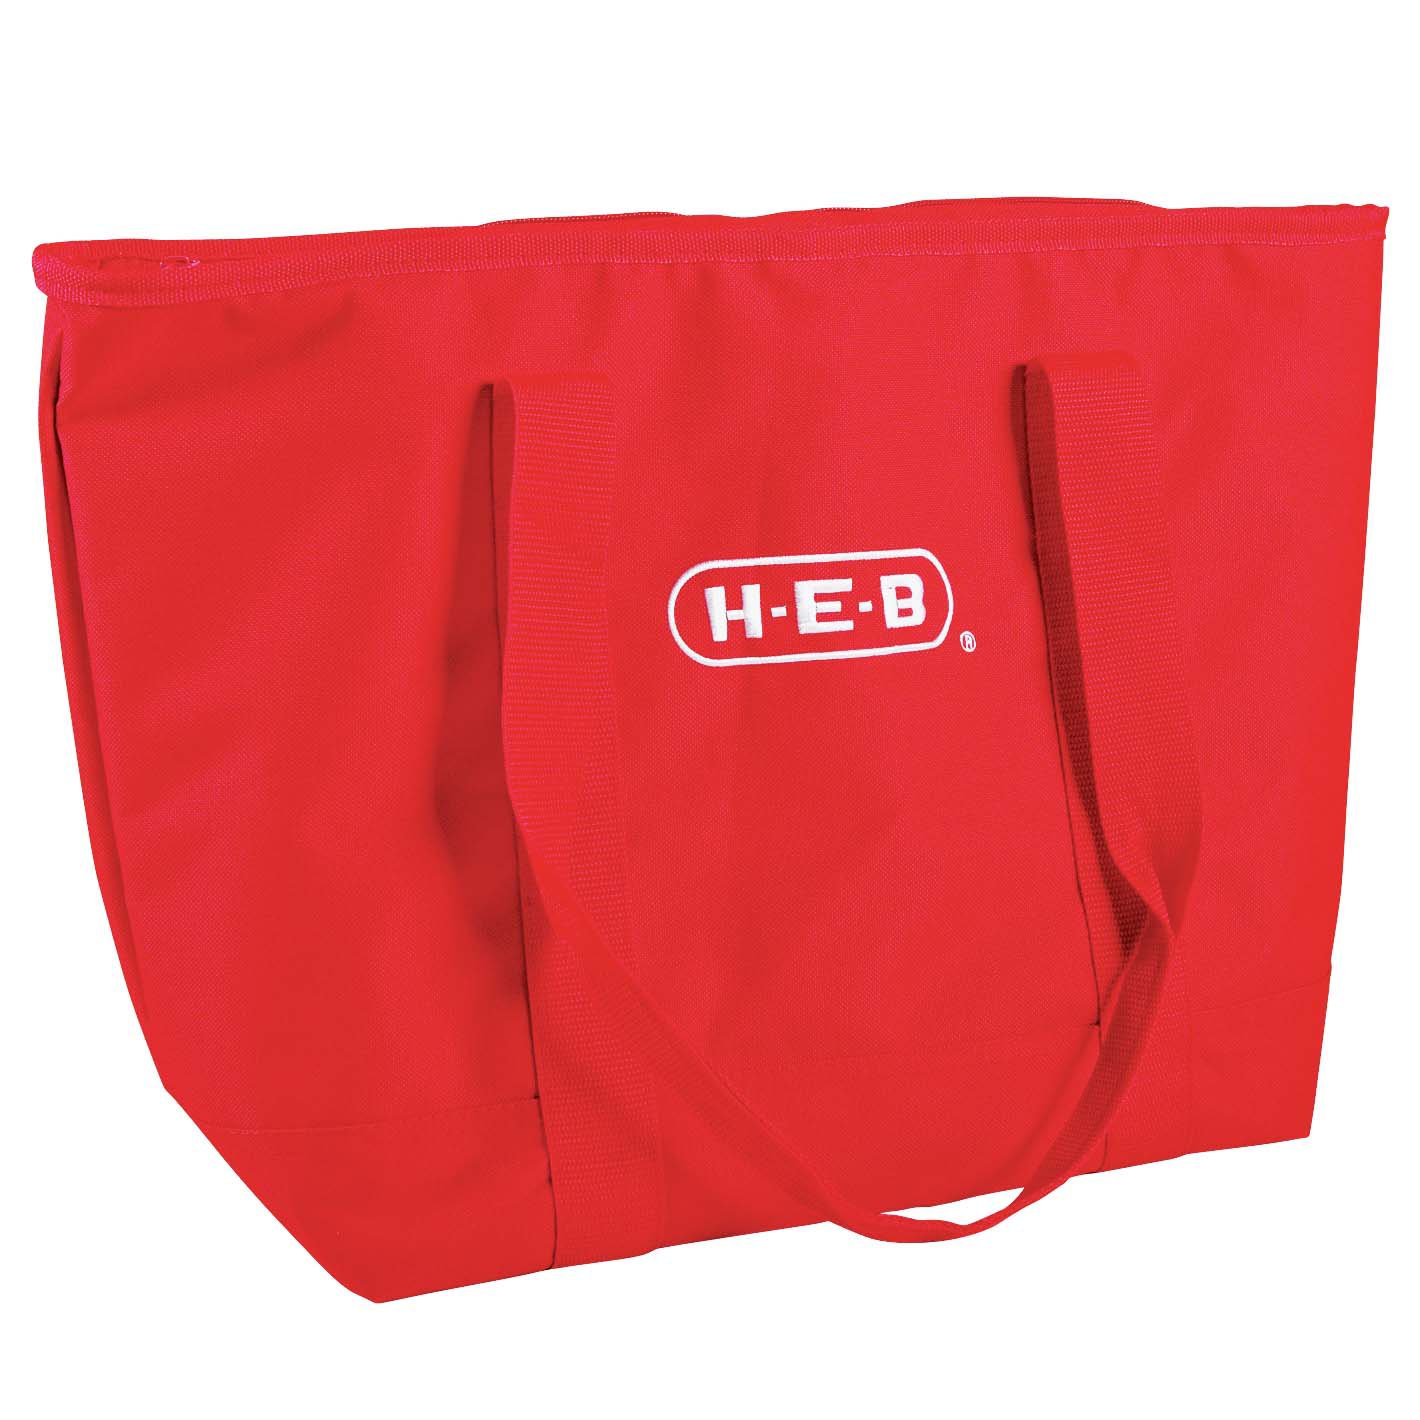 thermal insulated grocery bags